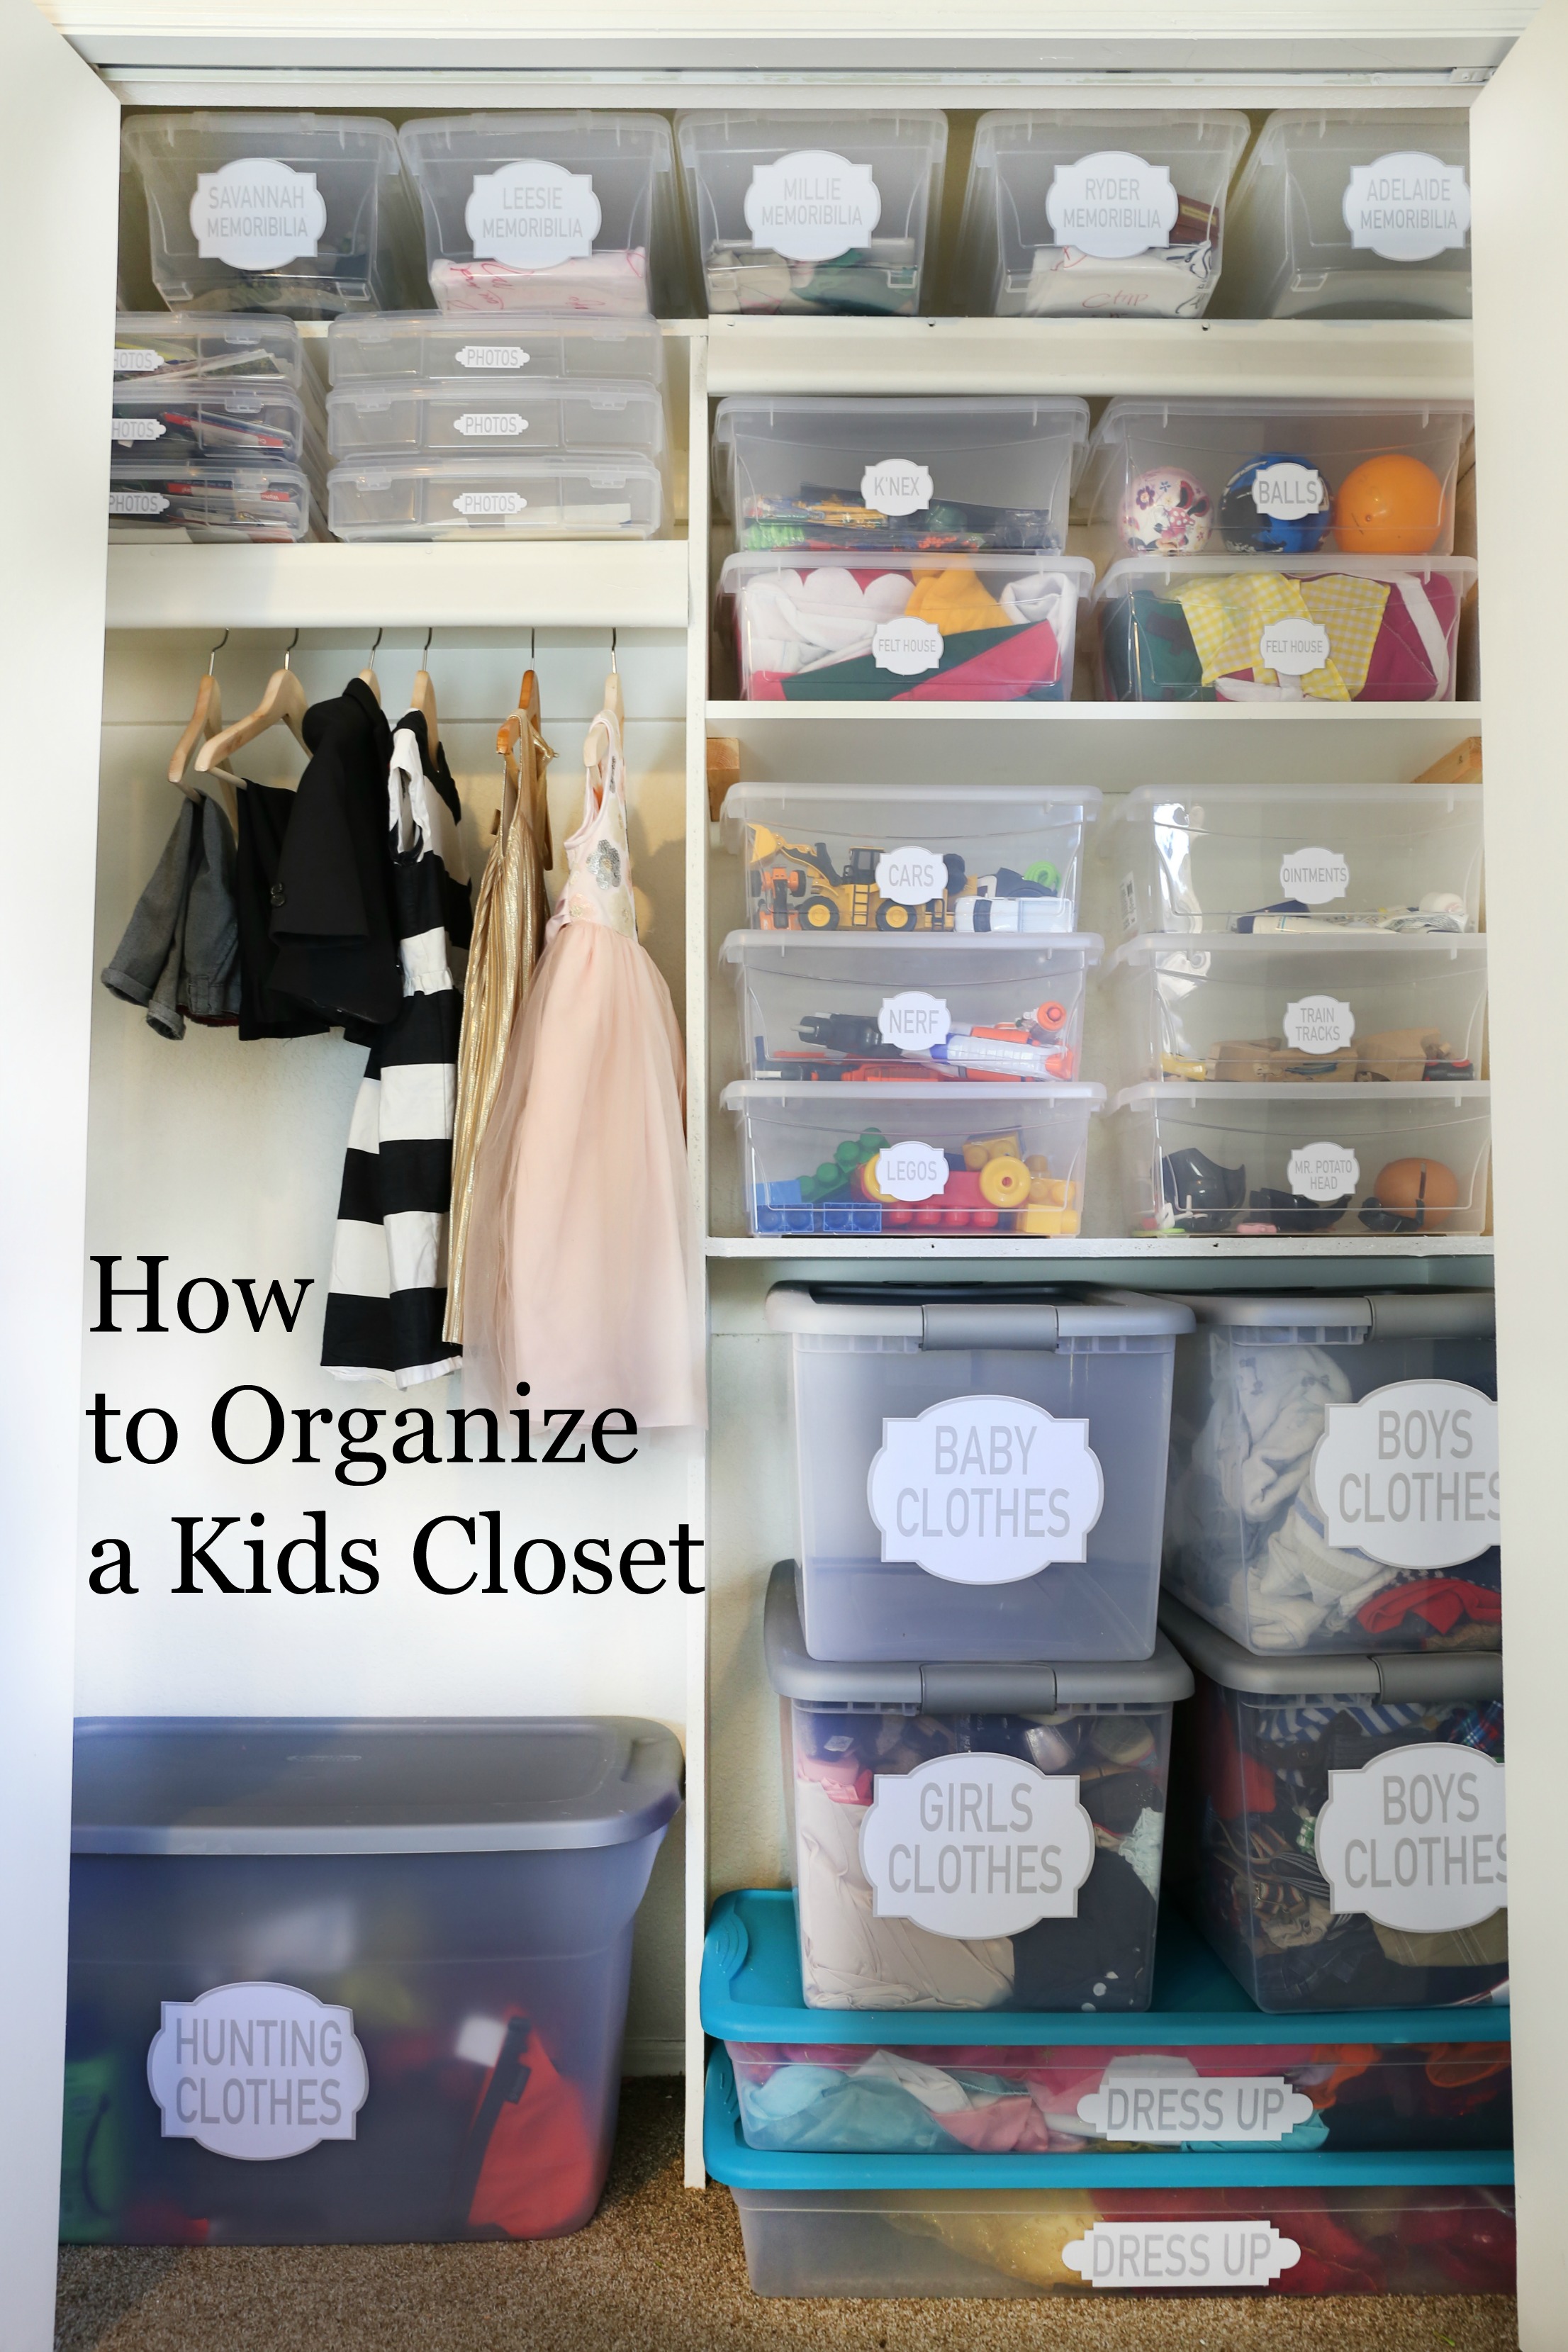 How to De-clutter My Craft Closet Craft Room Storage Ideas Diy. How to  Declutter My Craft Closet, Garage, or Toys 